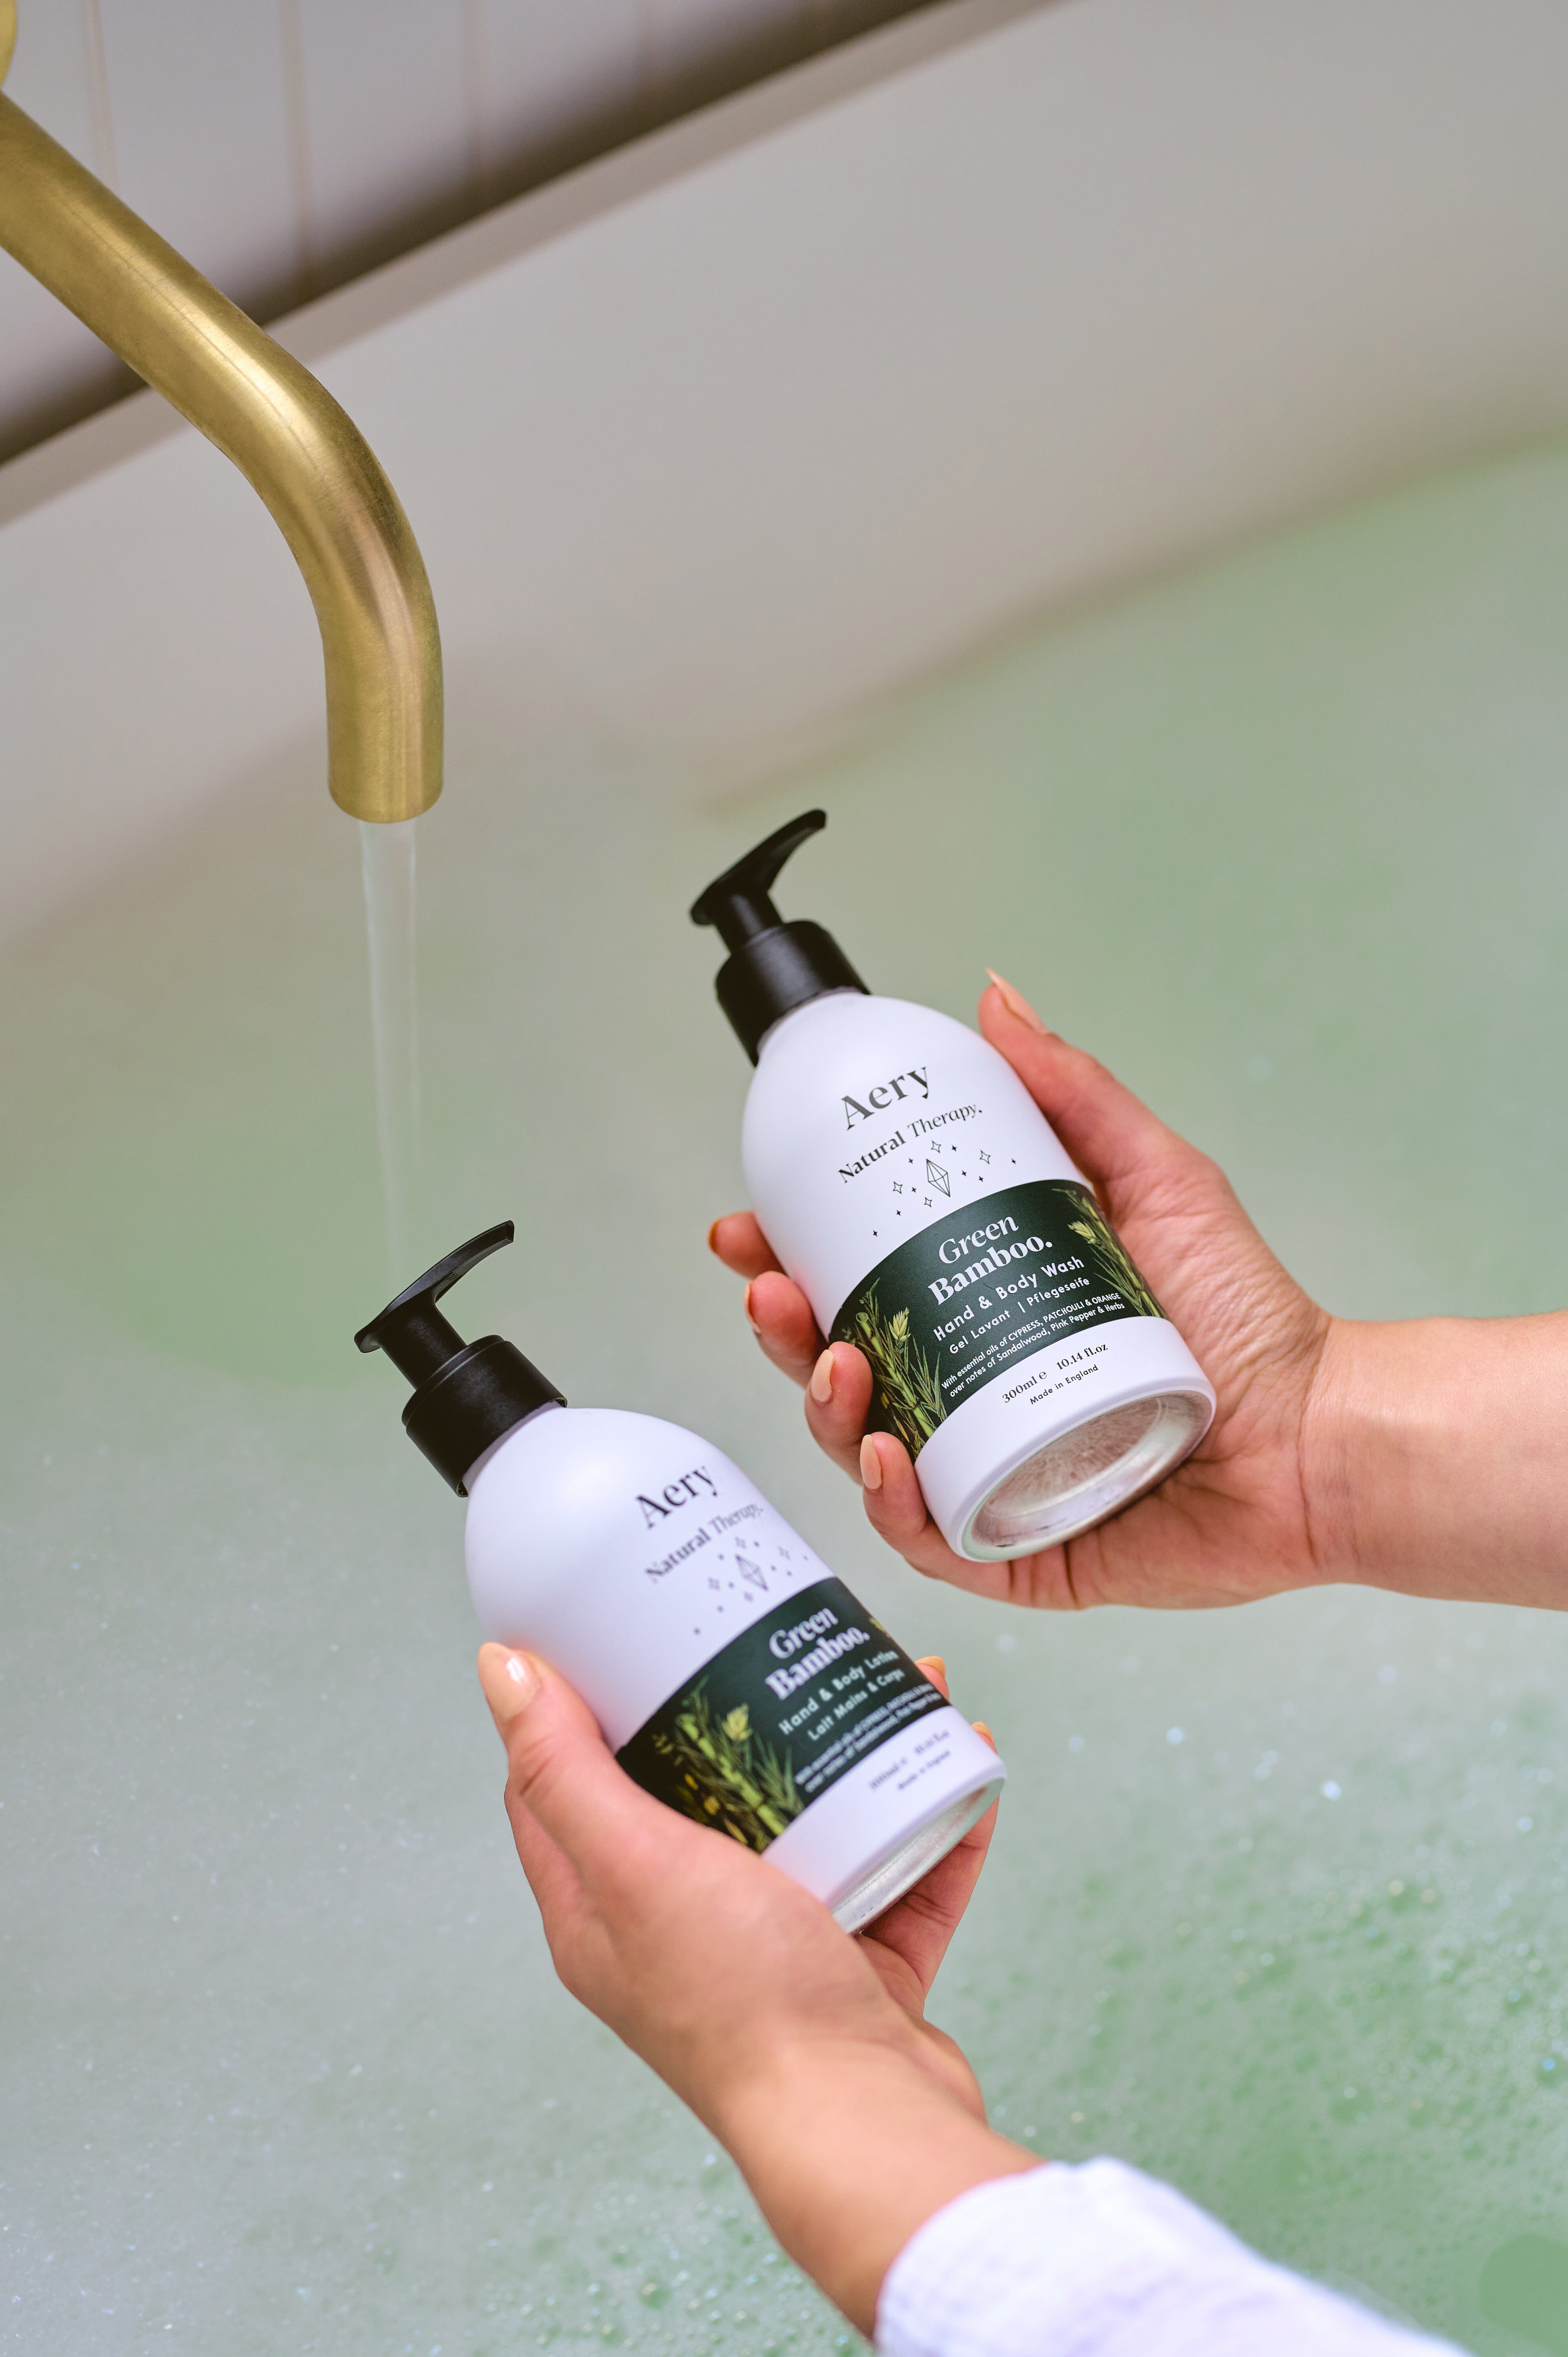 Green Bamboo hand and body wash and lotion duo by Aery displayed in hands over bubble bath